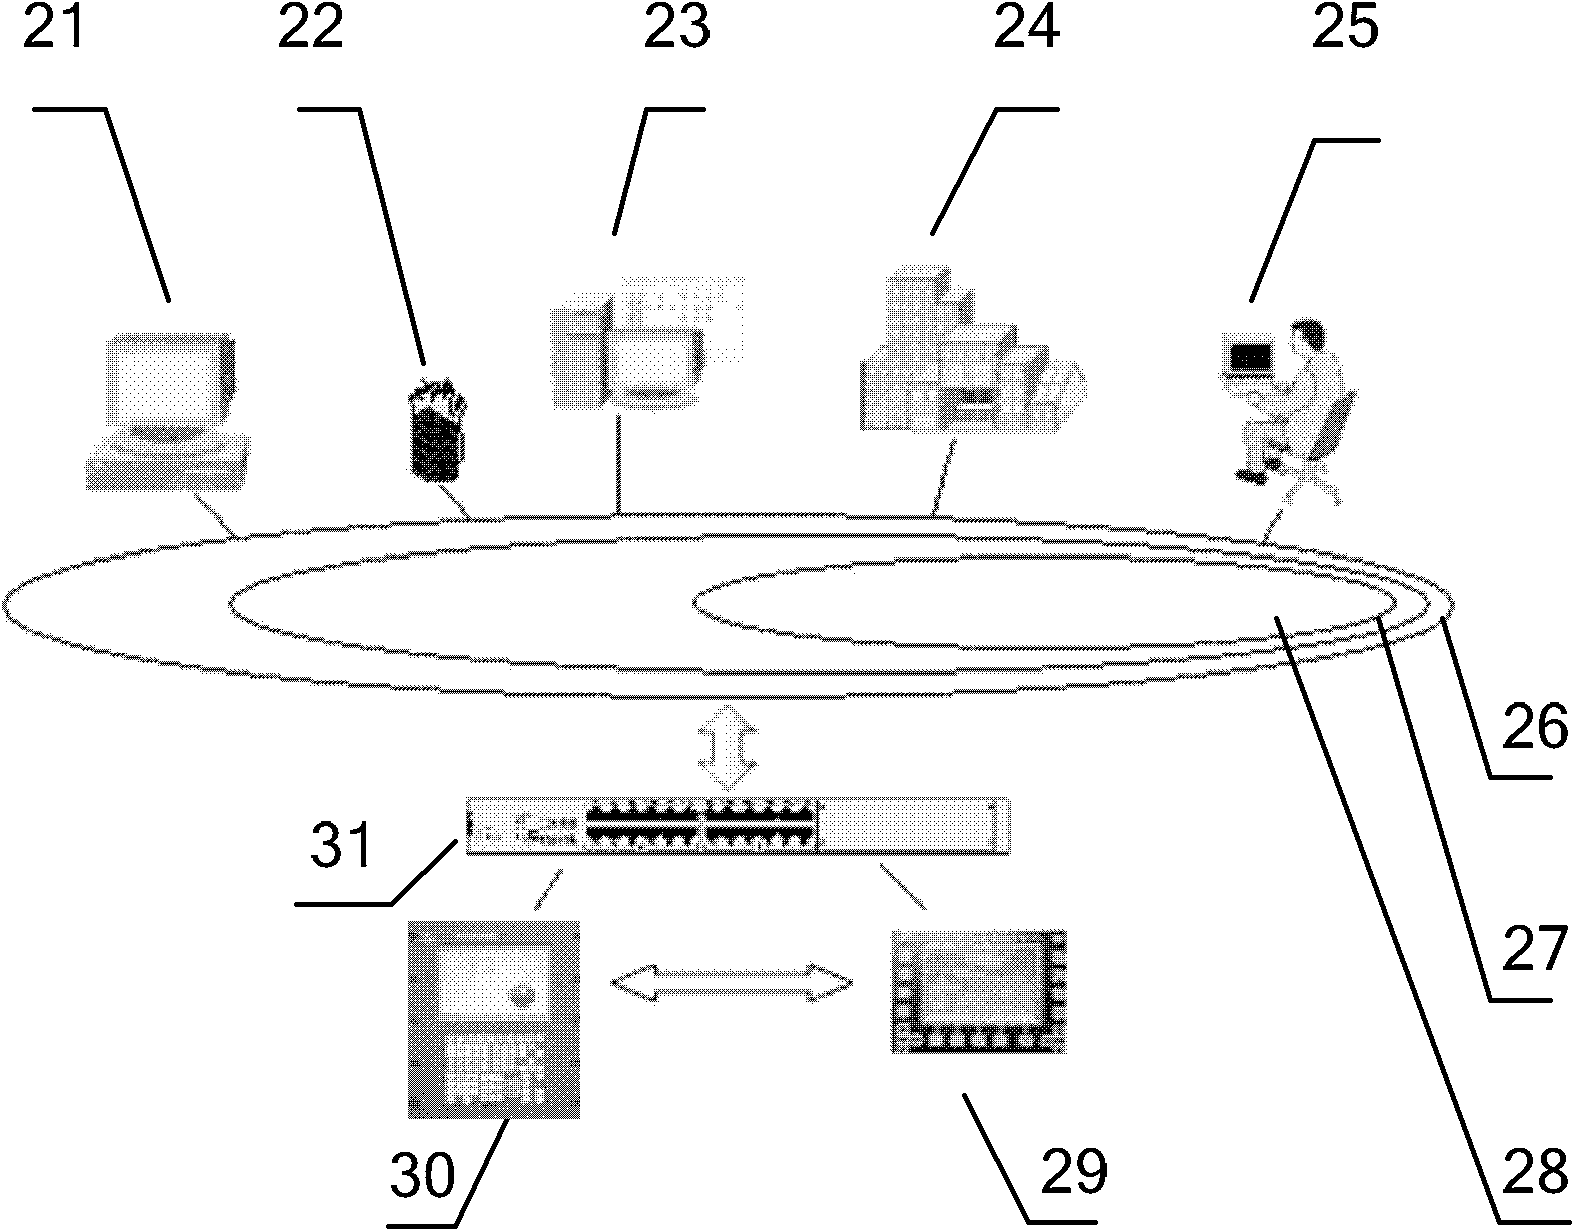 Online monitoring numerical-control system based on network architecture